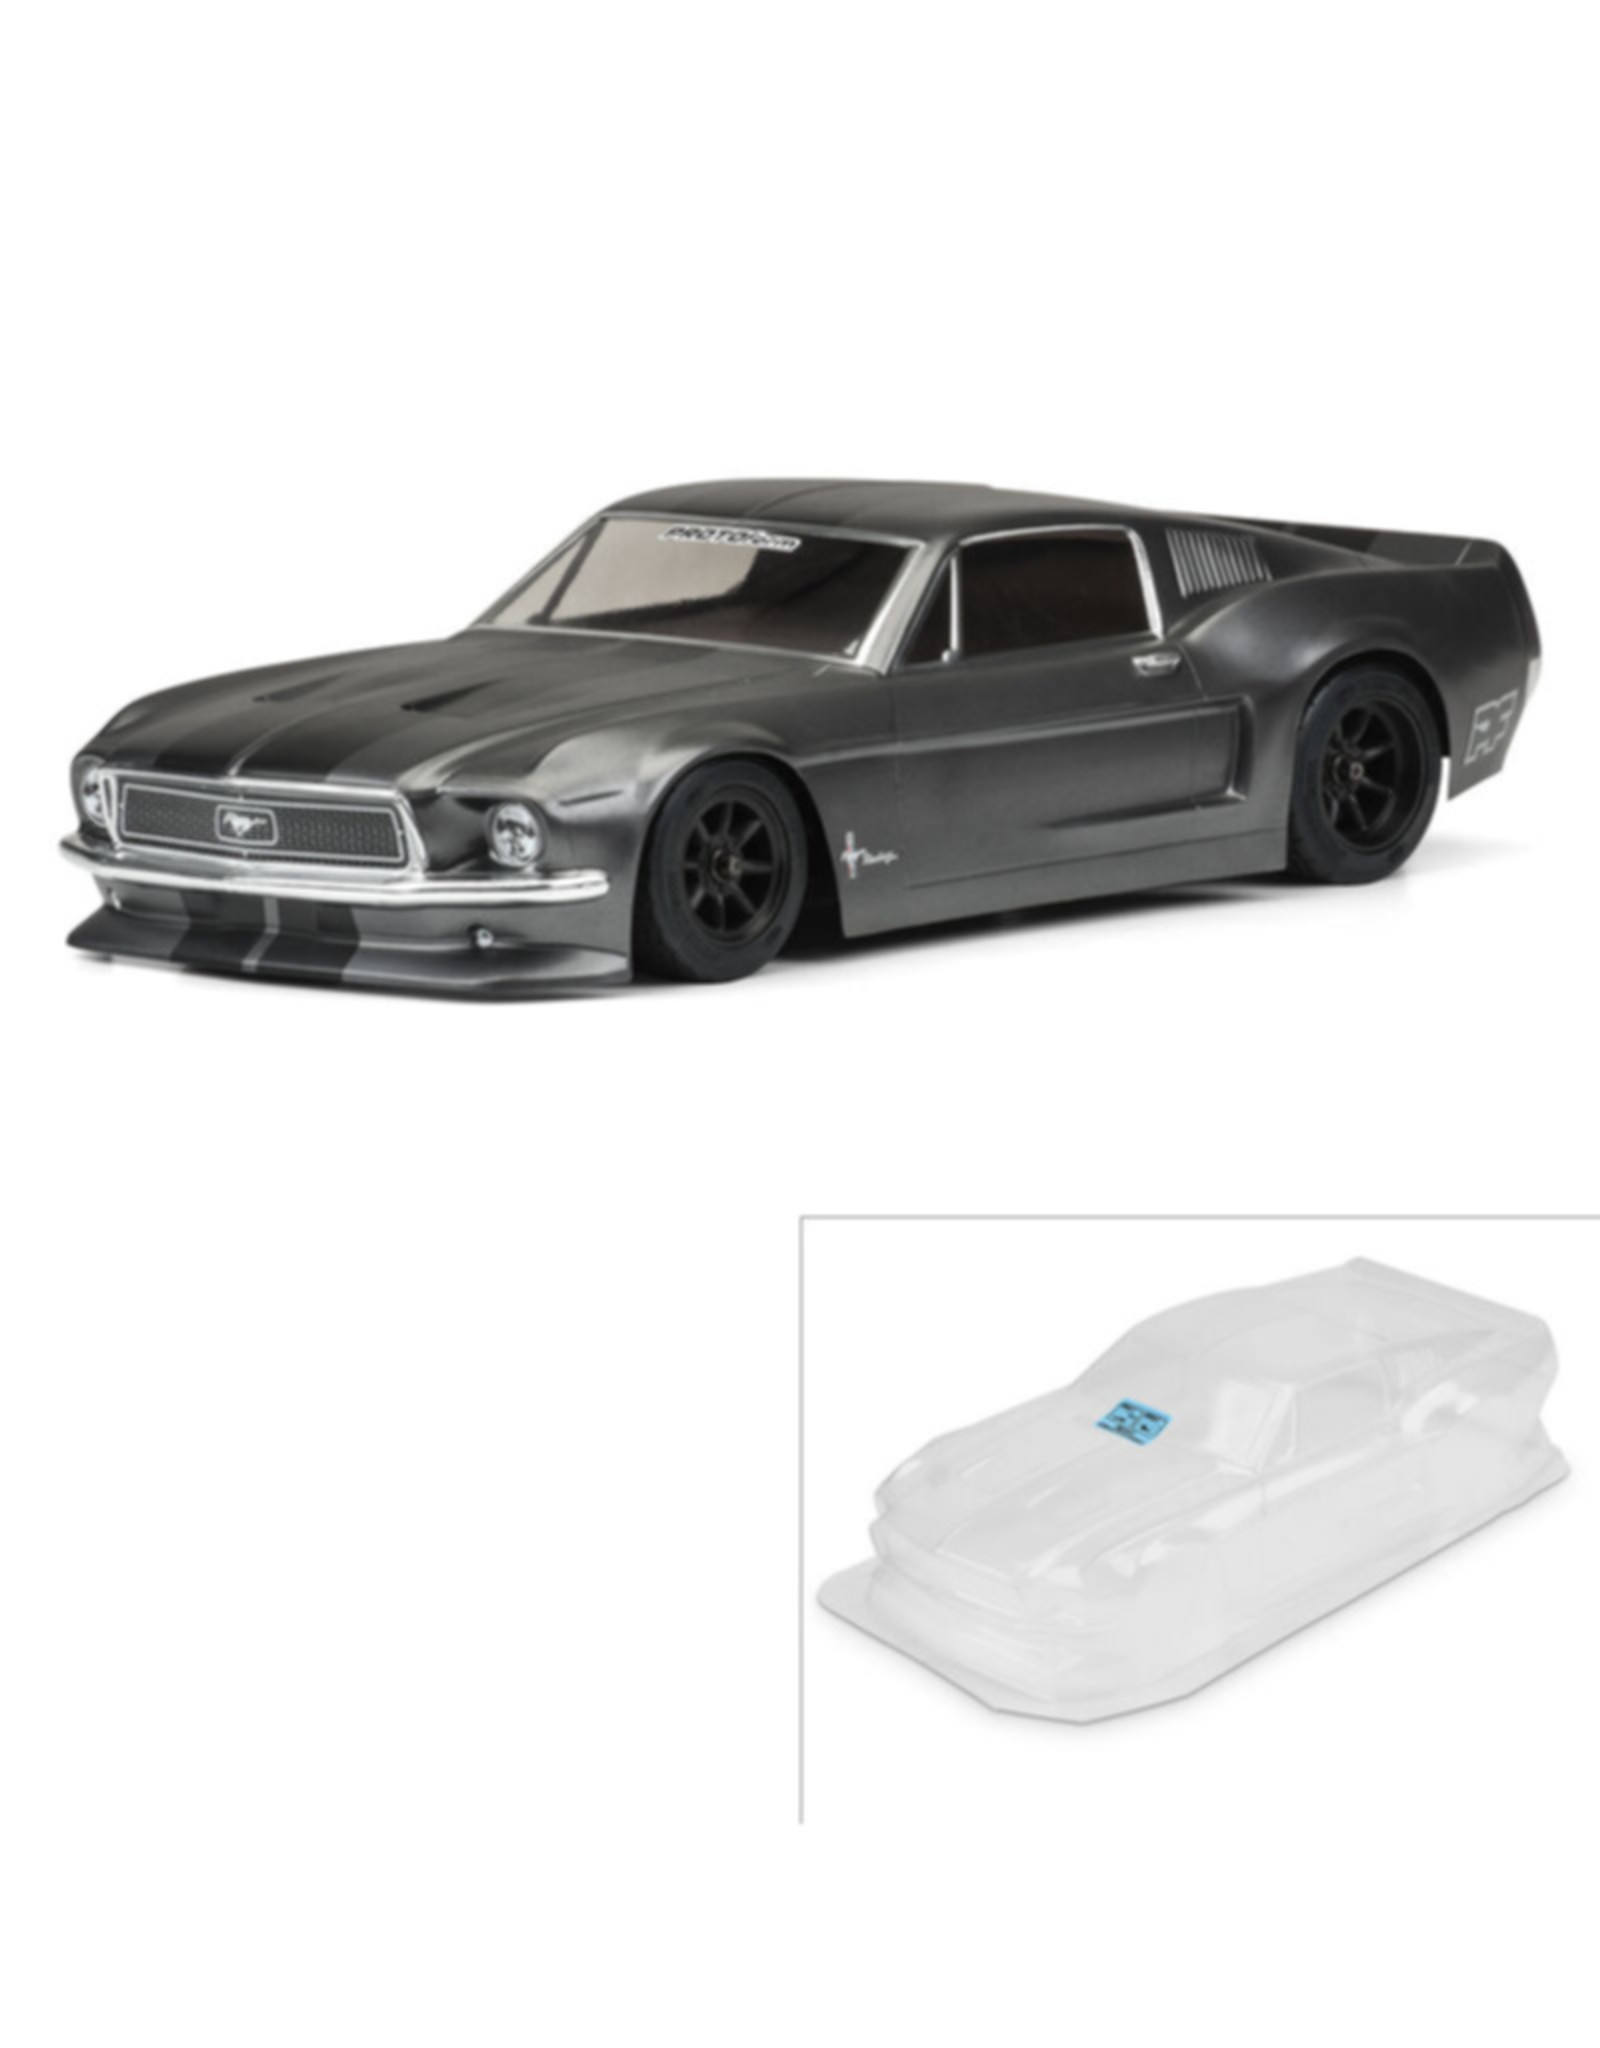 Protoform PRM155840 1968 Ford Mustang Clear Body VTA Class